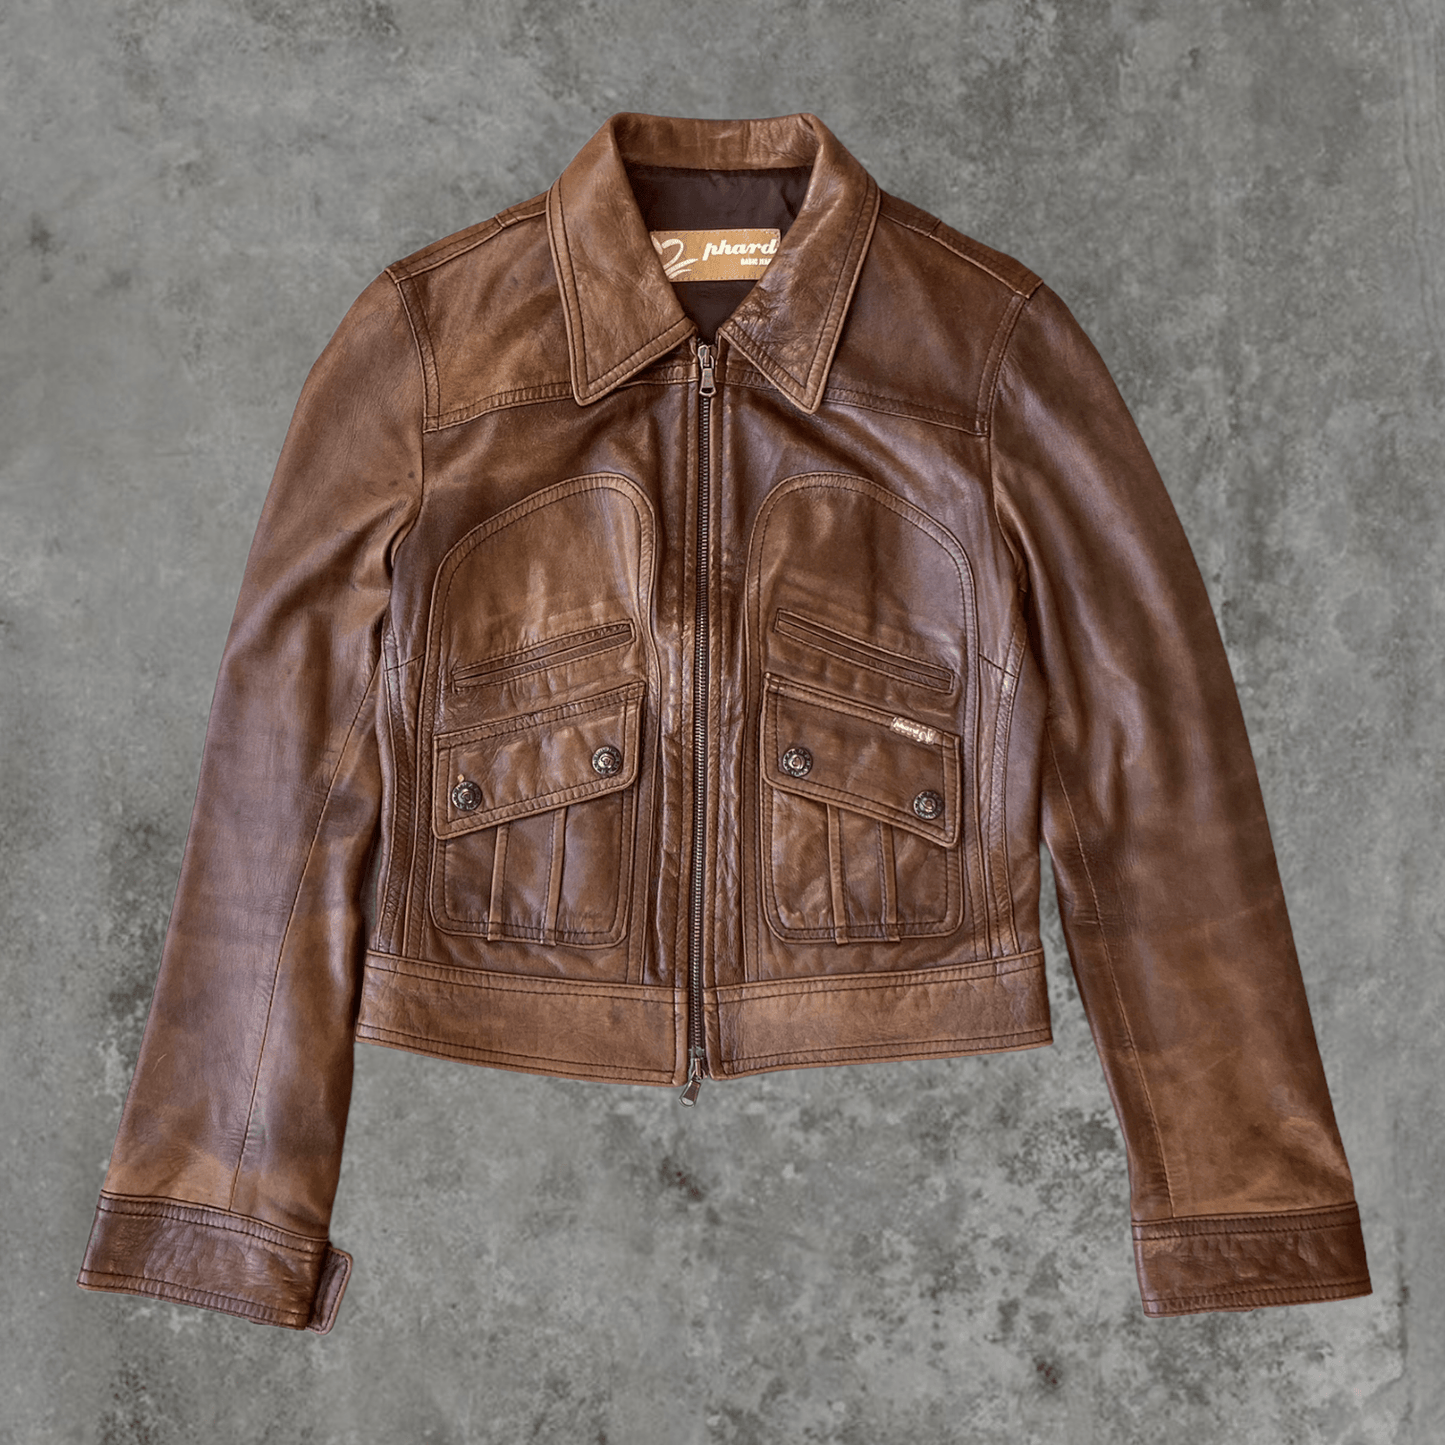 BROWN LEATHER COLLARED JACKET - S - Known Source